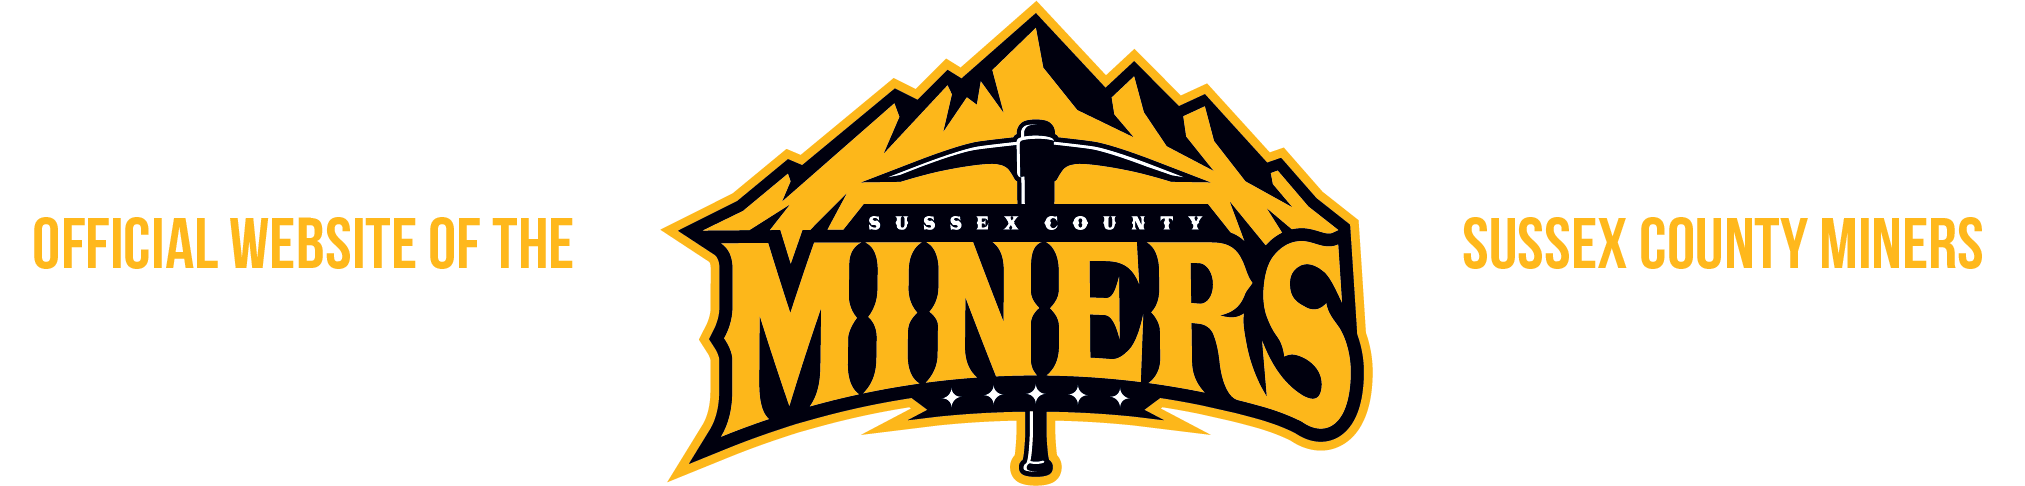 Miners Logo - Sussex County Miners The Official Website of the Sussex County Miners